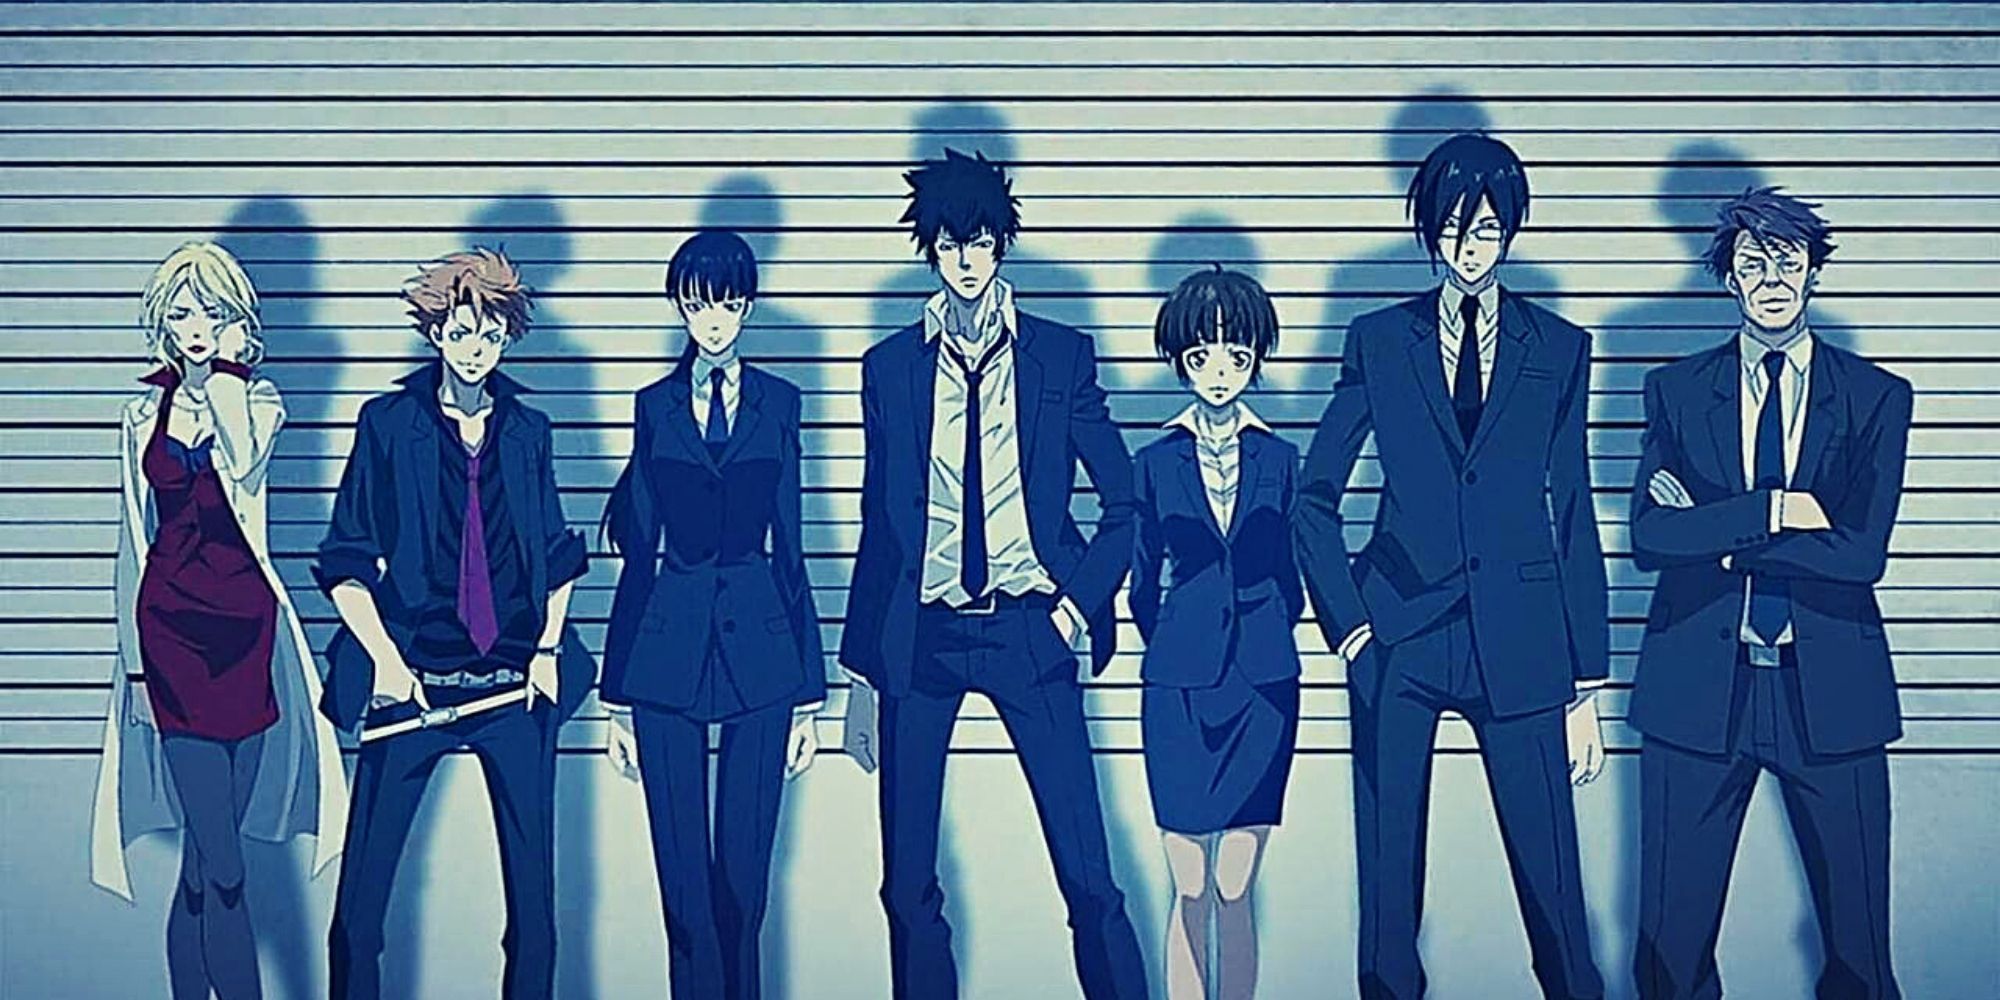 The main characters of Psycho pass in a line-up